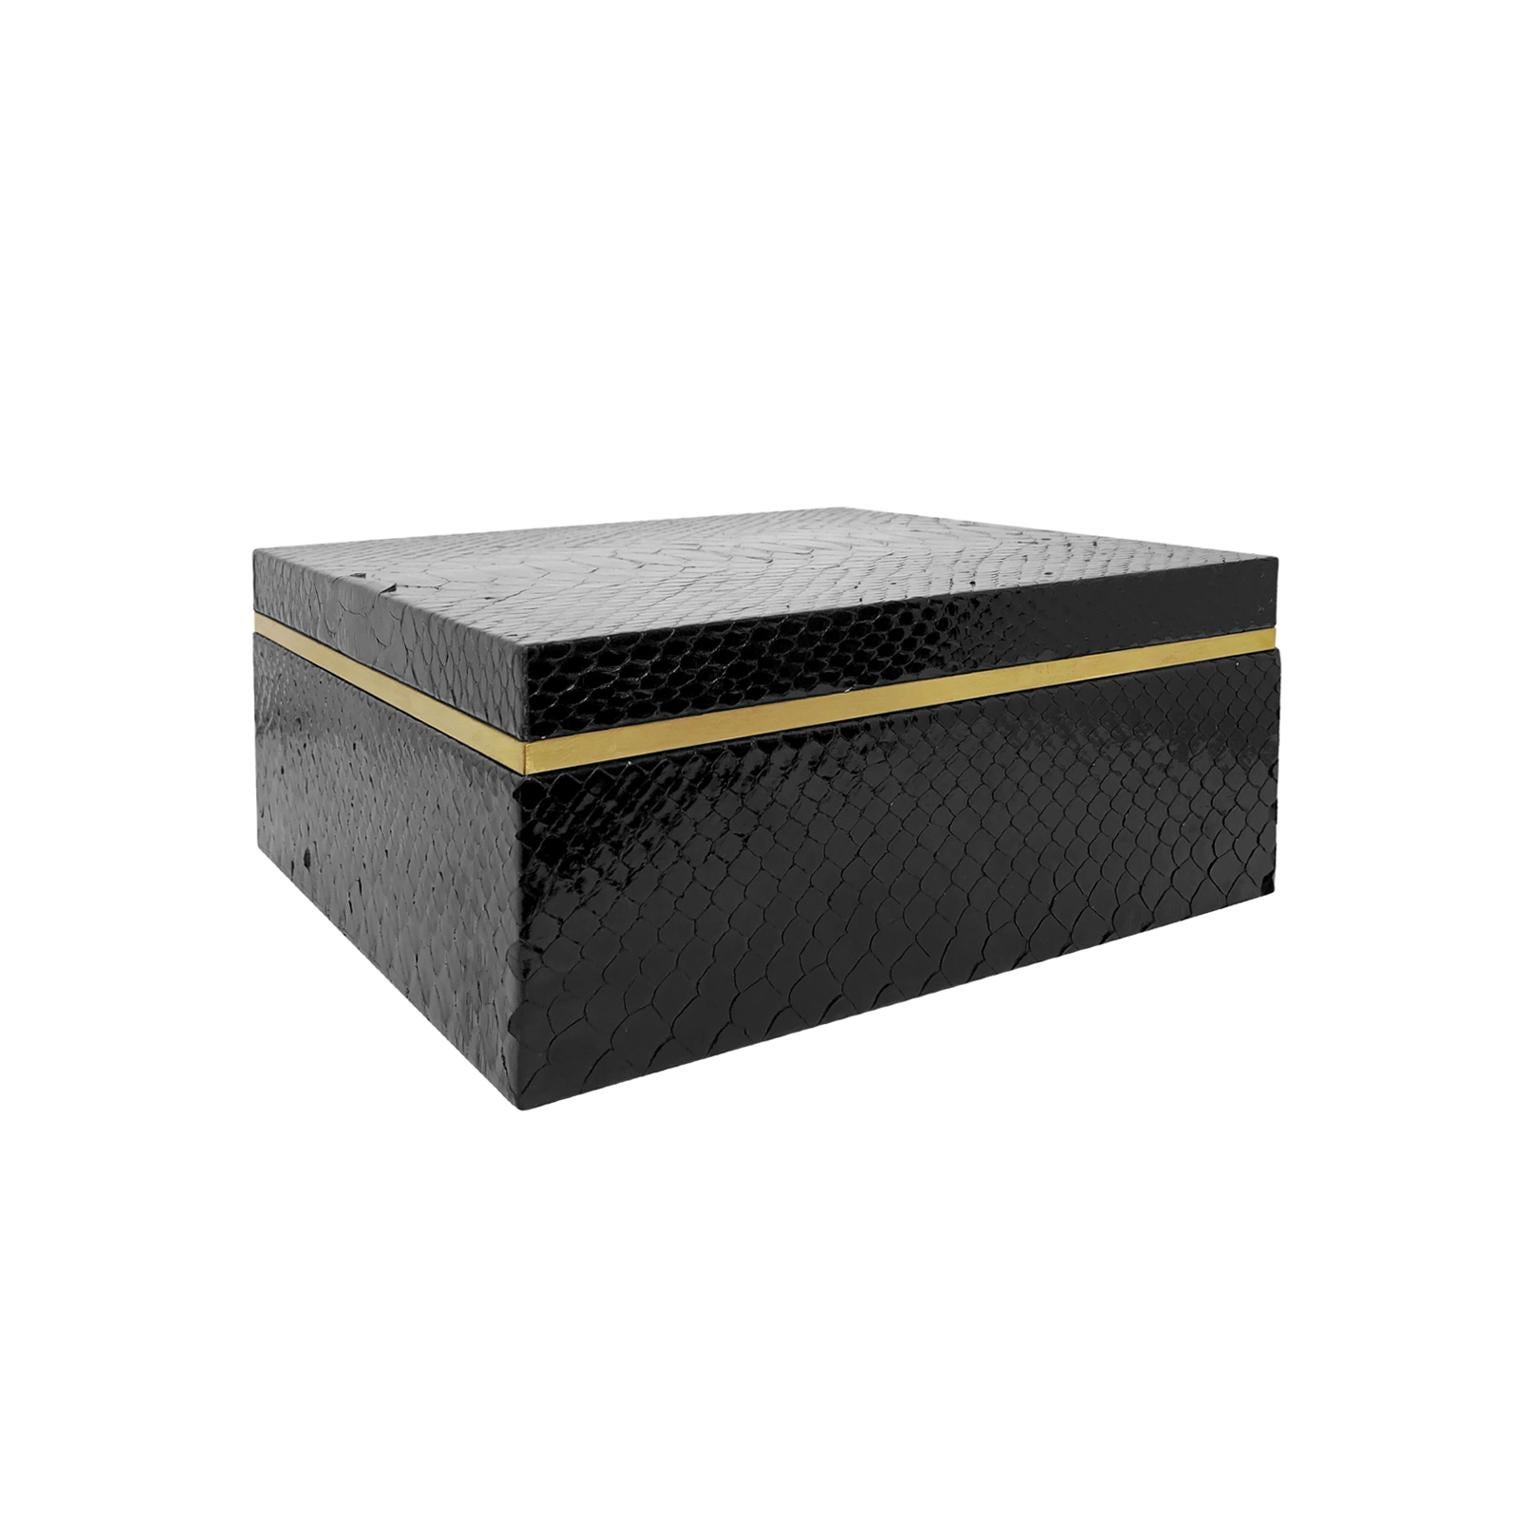 Flair Home collection handmade square black python box with brass banding and brass and suede interior.